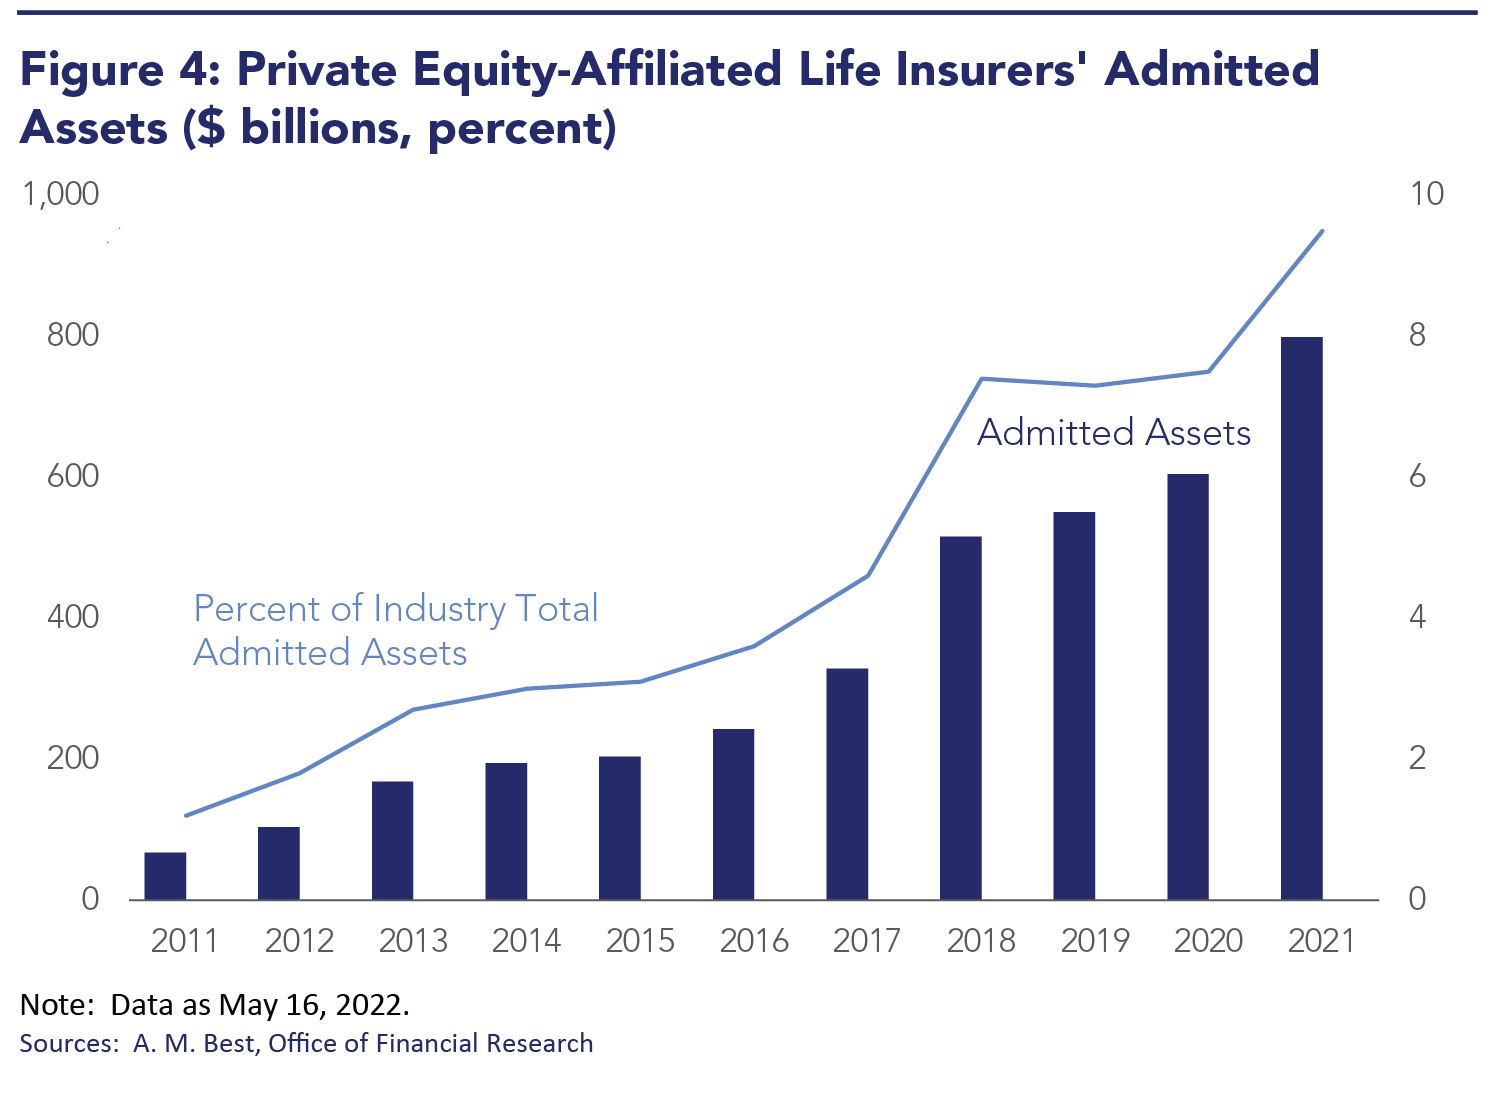 Private Equity-Affiliated Life Insurers' Admitted Assets ($ billions, percent)